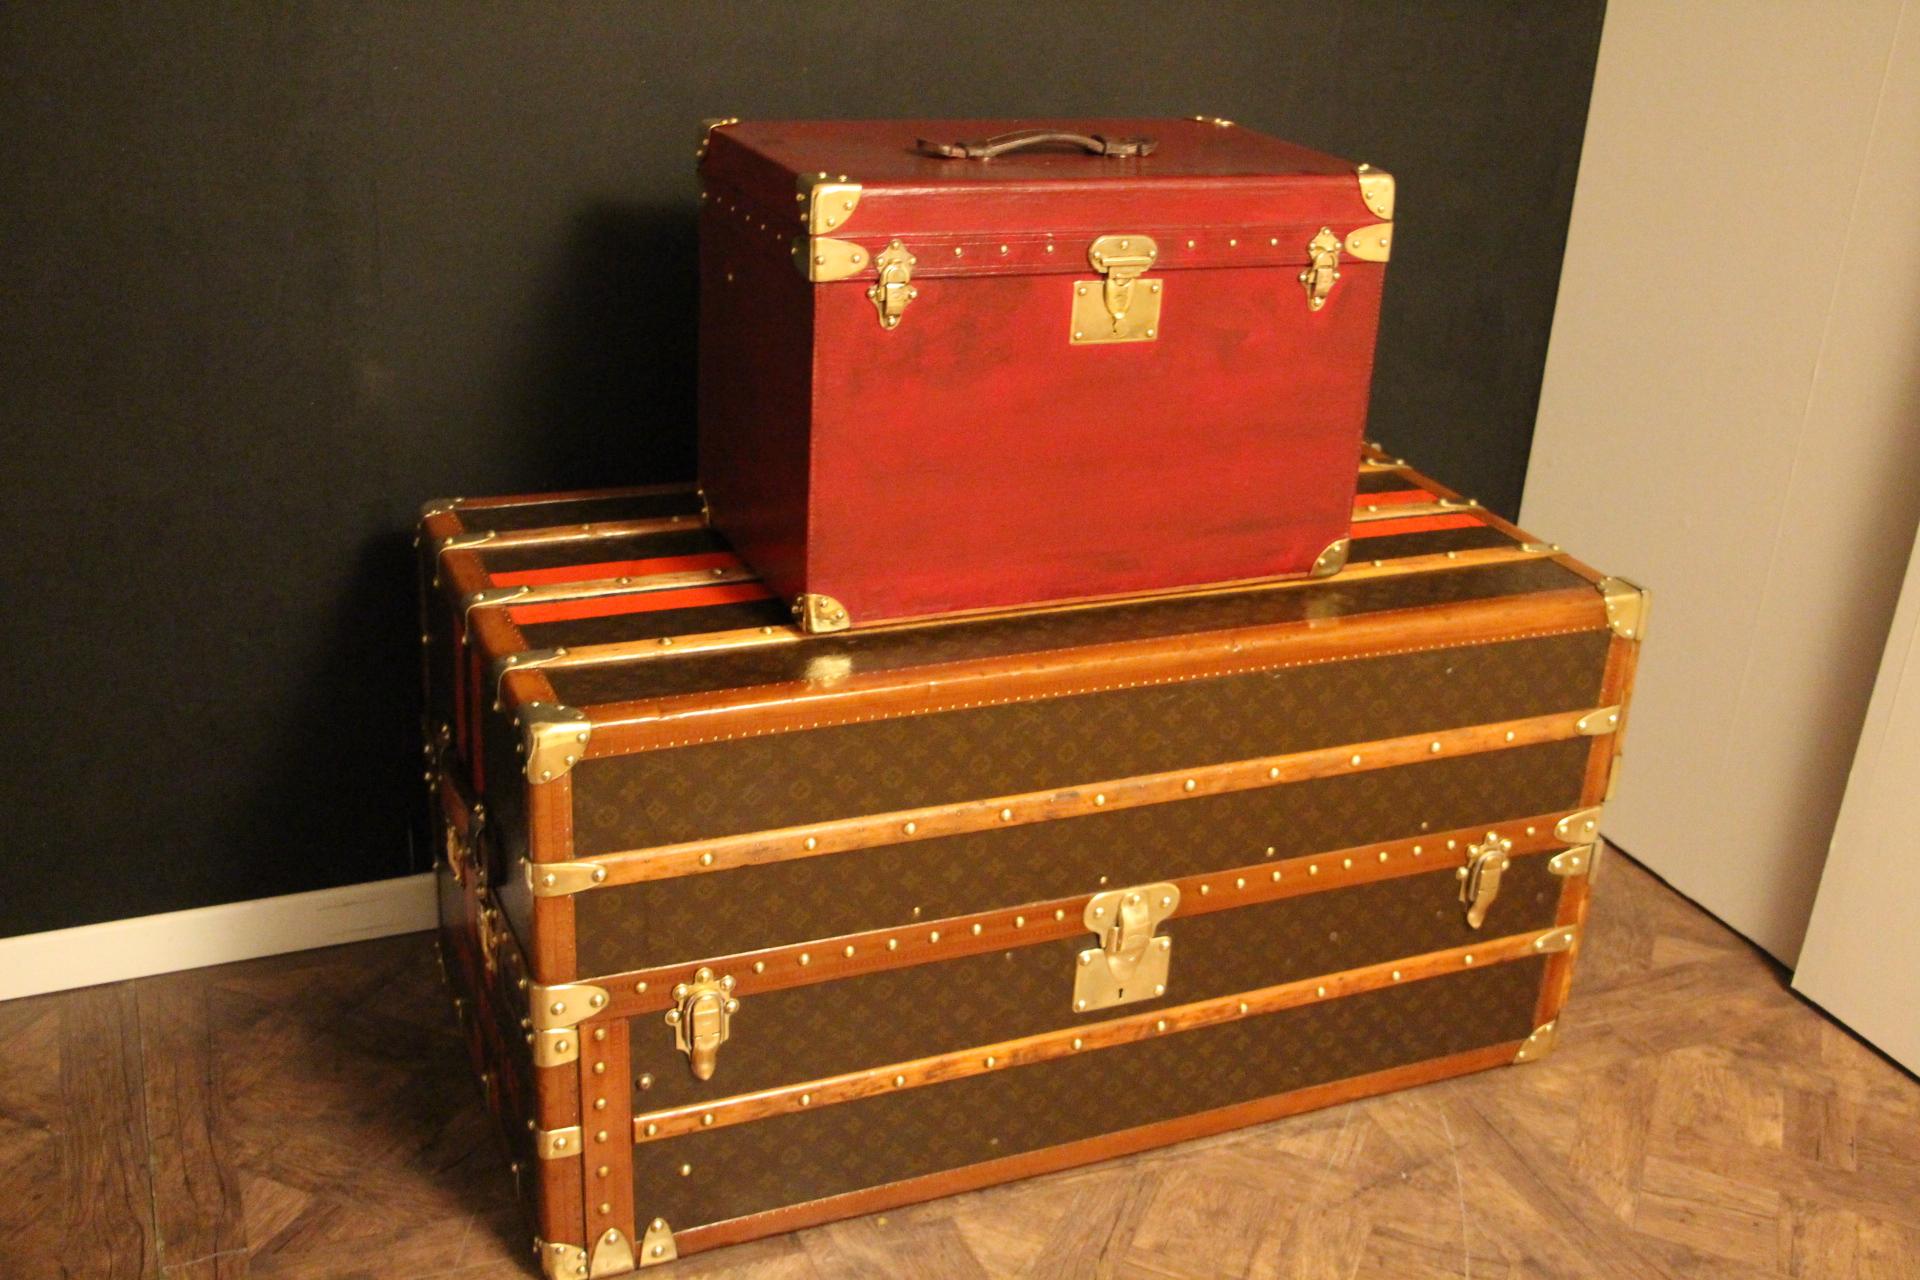 This adorable little Goyard trunk features Hermes red color canvas, solid brass corners and solid brass engraved Goyard lock and clasps. It has got a large leather handle on the top.
Its interior is all original too in cream color lining and it